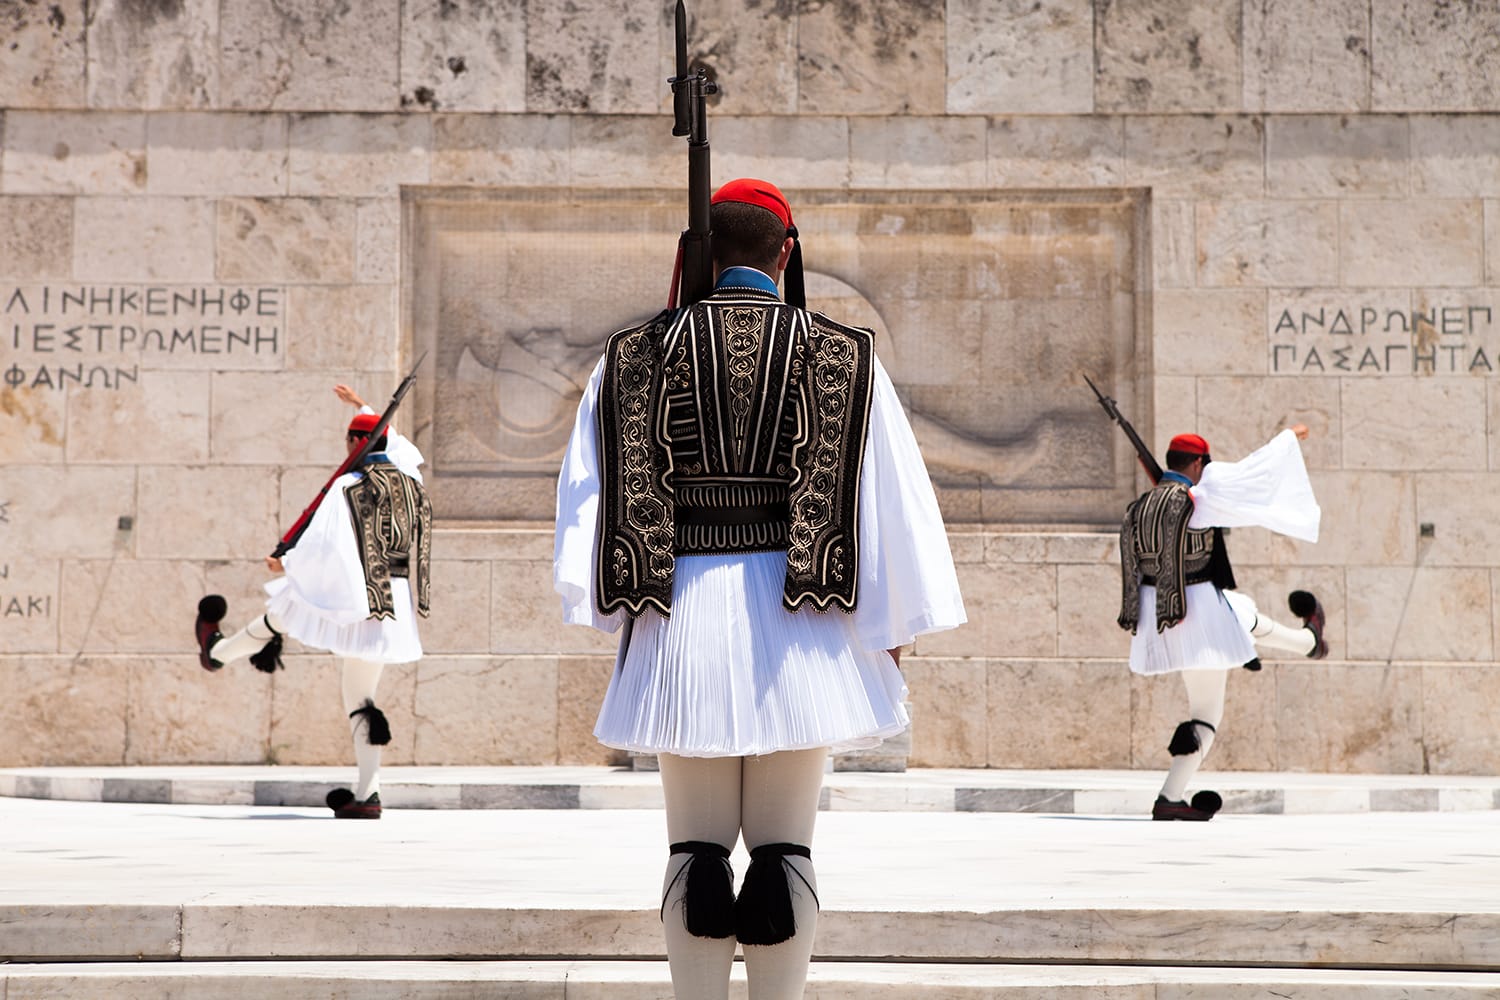 The Changing of the Guard ceremony takes place in front of the Greek Parliament Building in Athens, Greece.